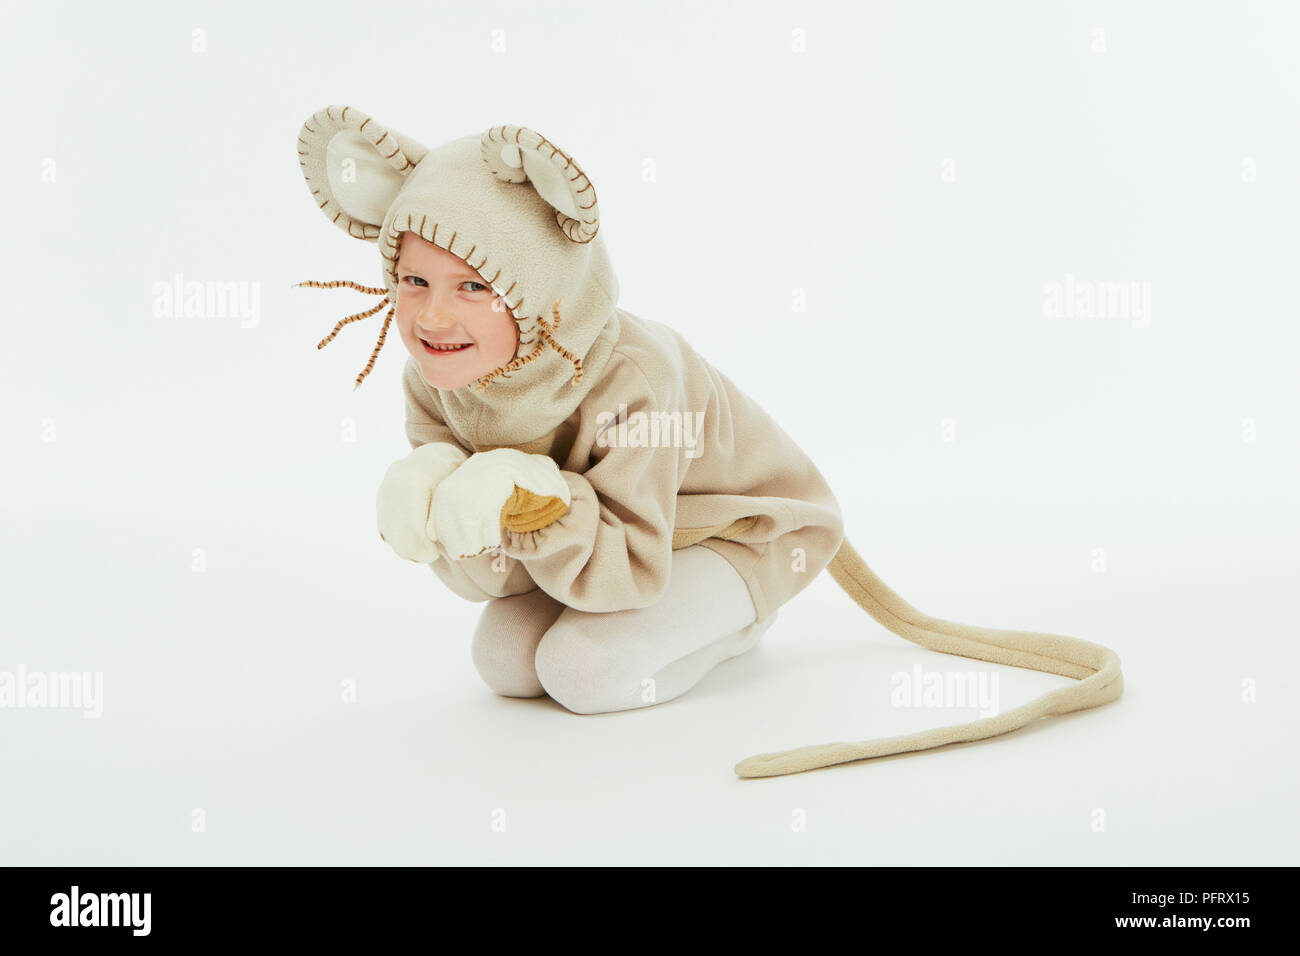 Young girl dressed in mouse costume Stock Photo